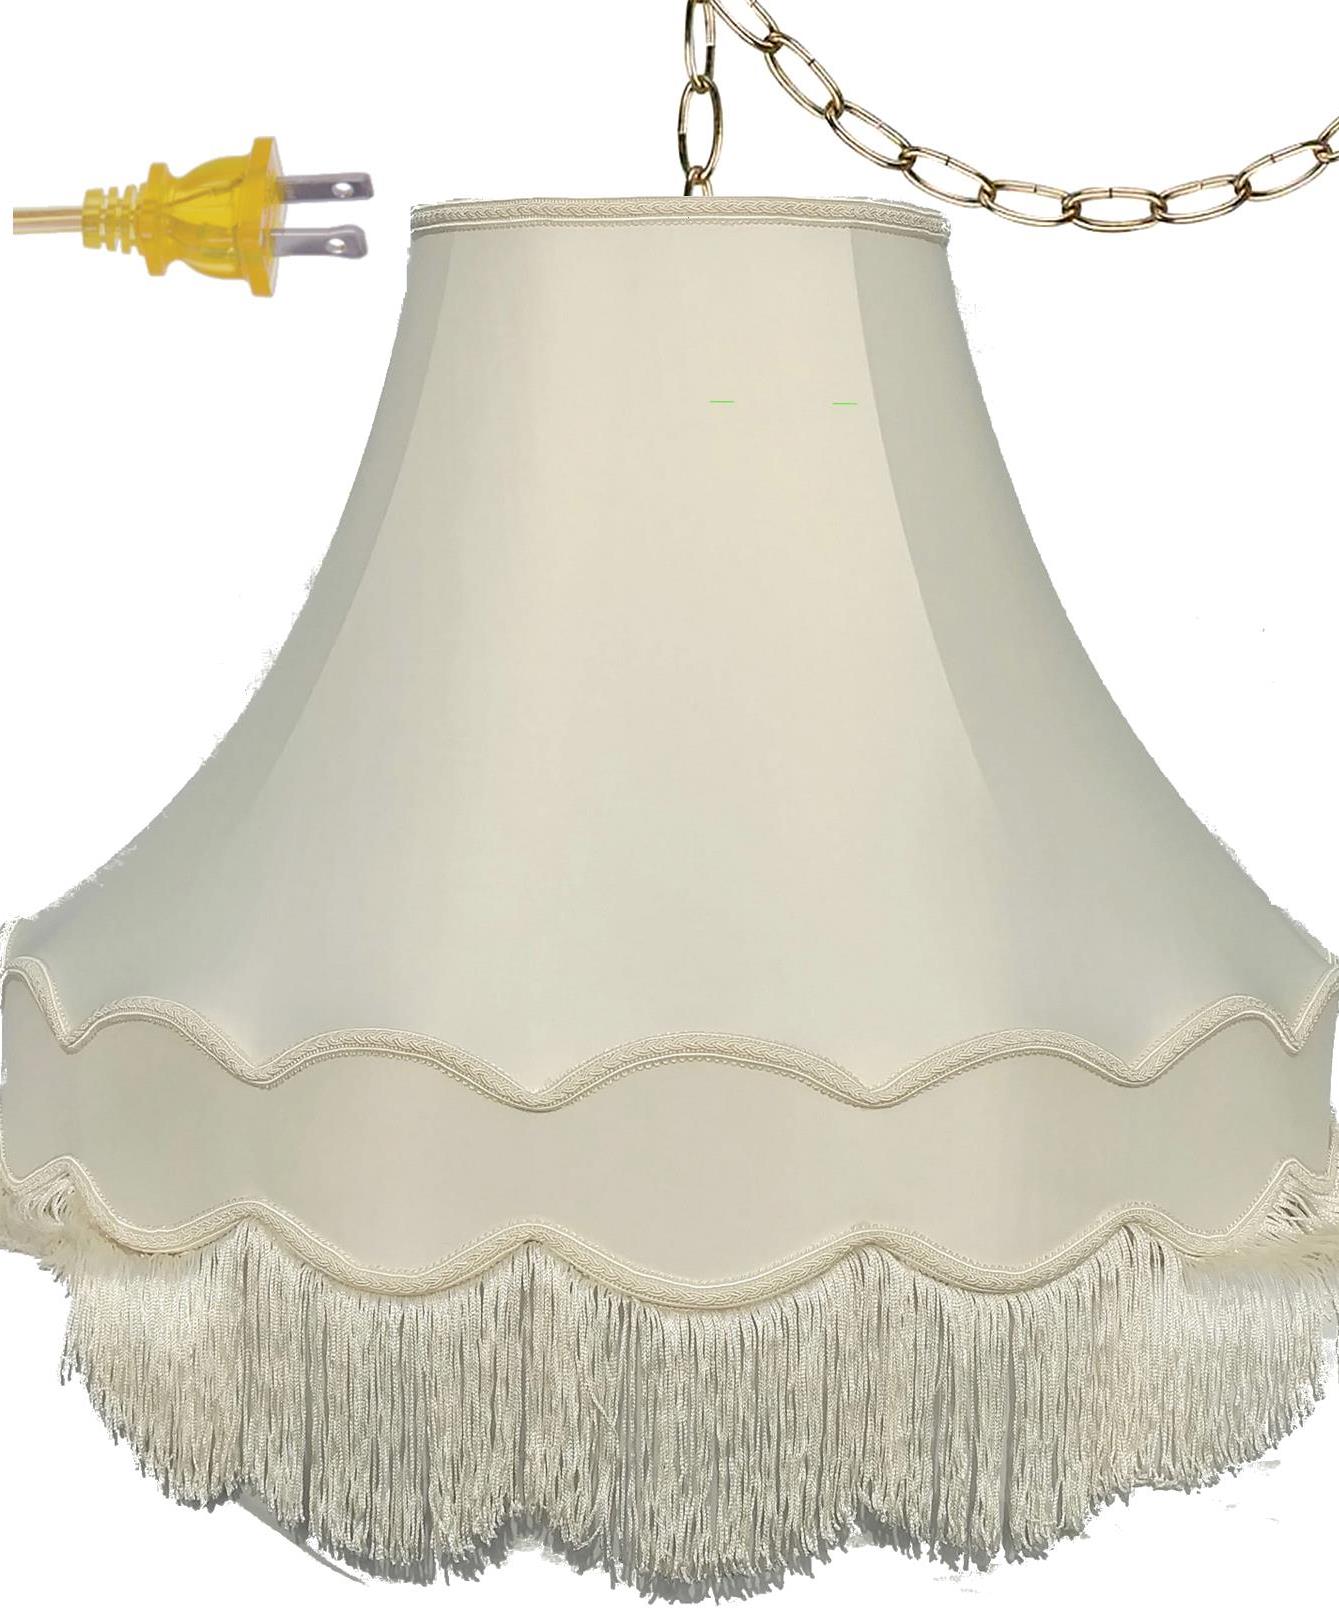 Victorian Gallery Bell Swag Light 14-20"W - Sale !